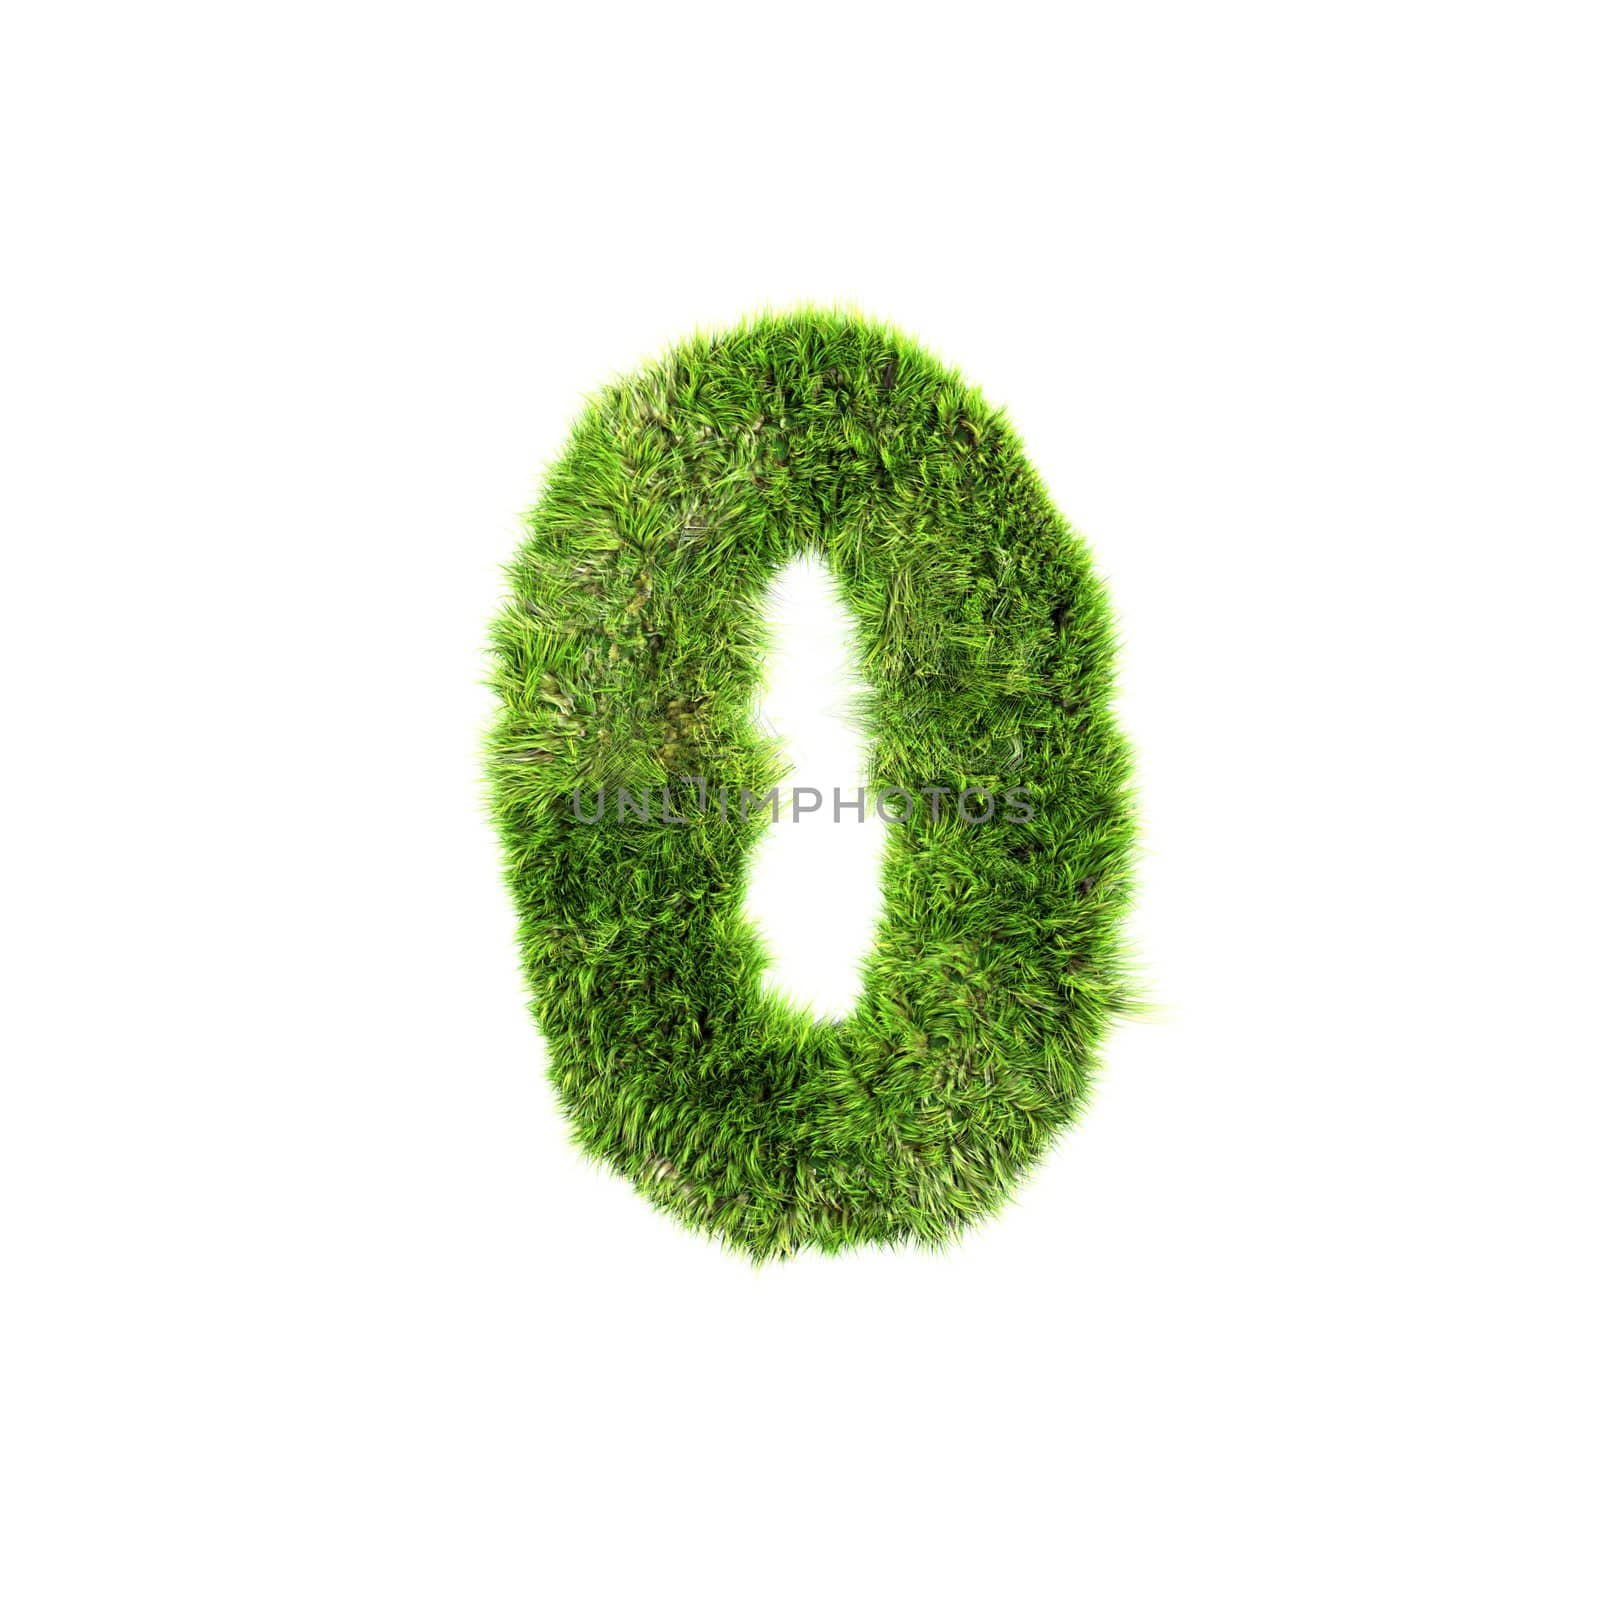 3d grass digit isolated on a white background - 0 by chrisroll